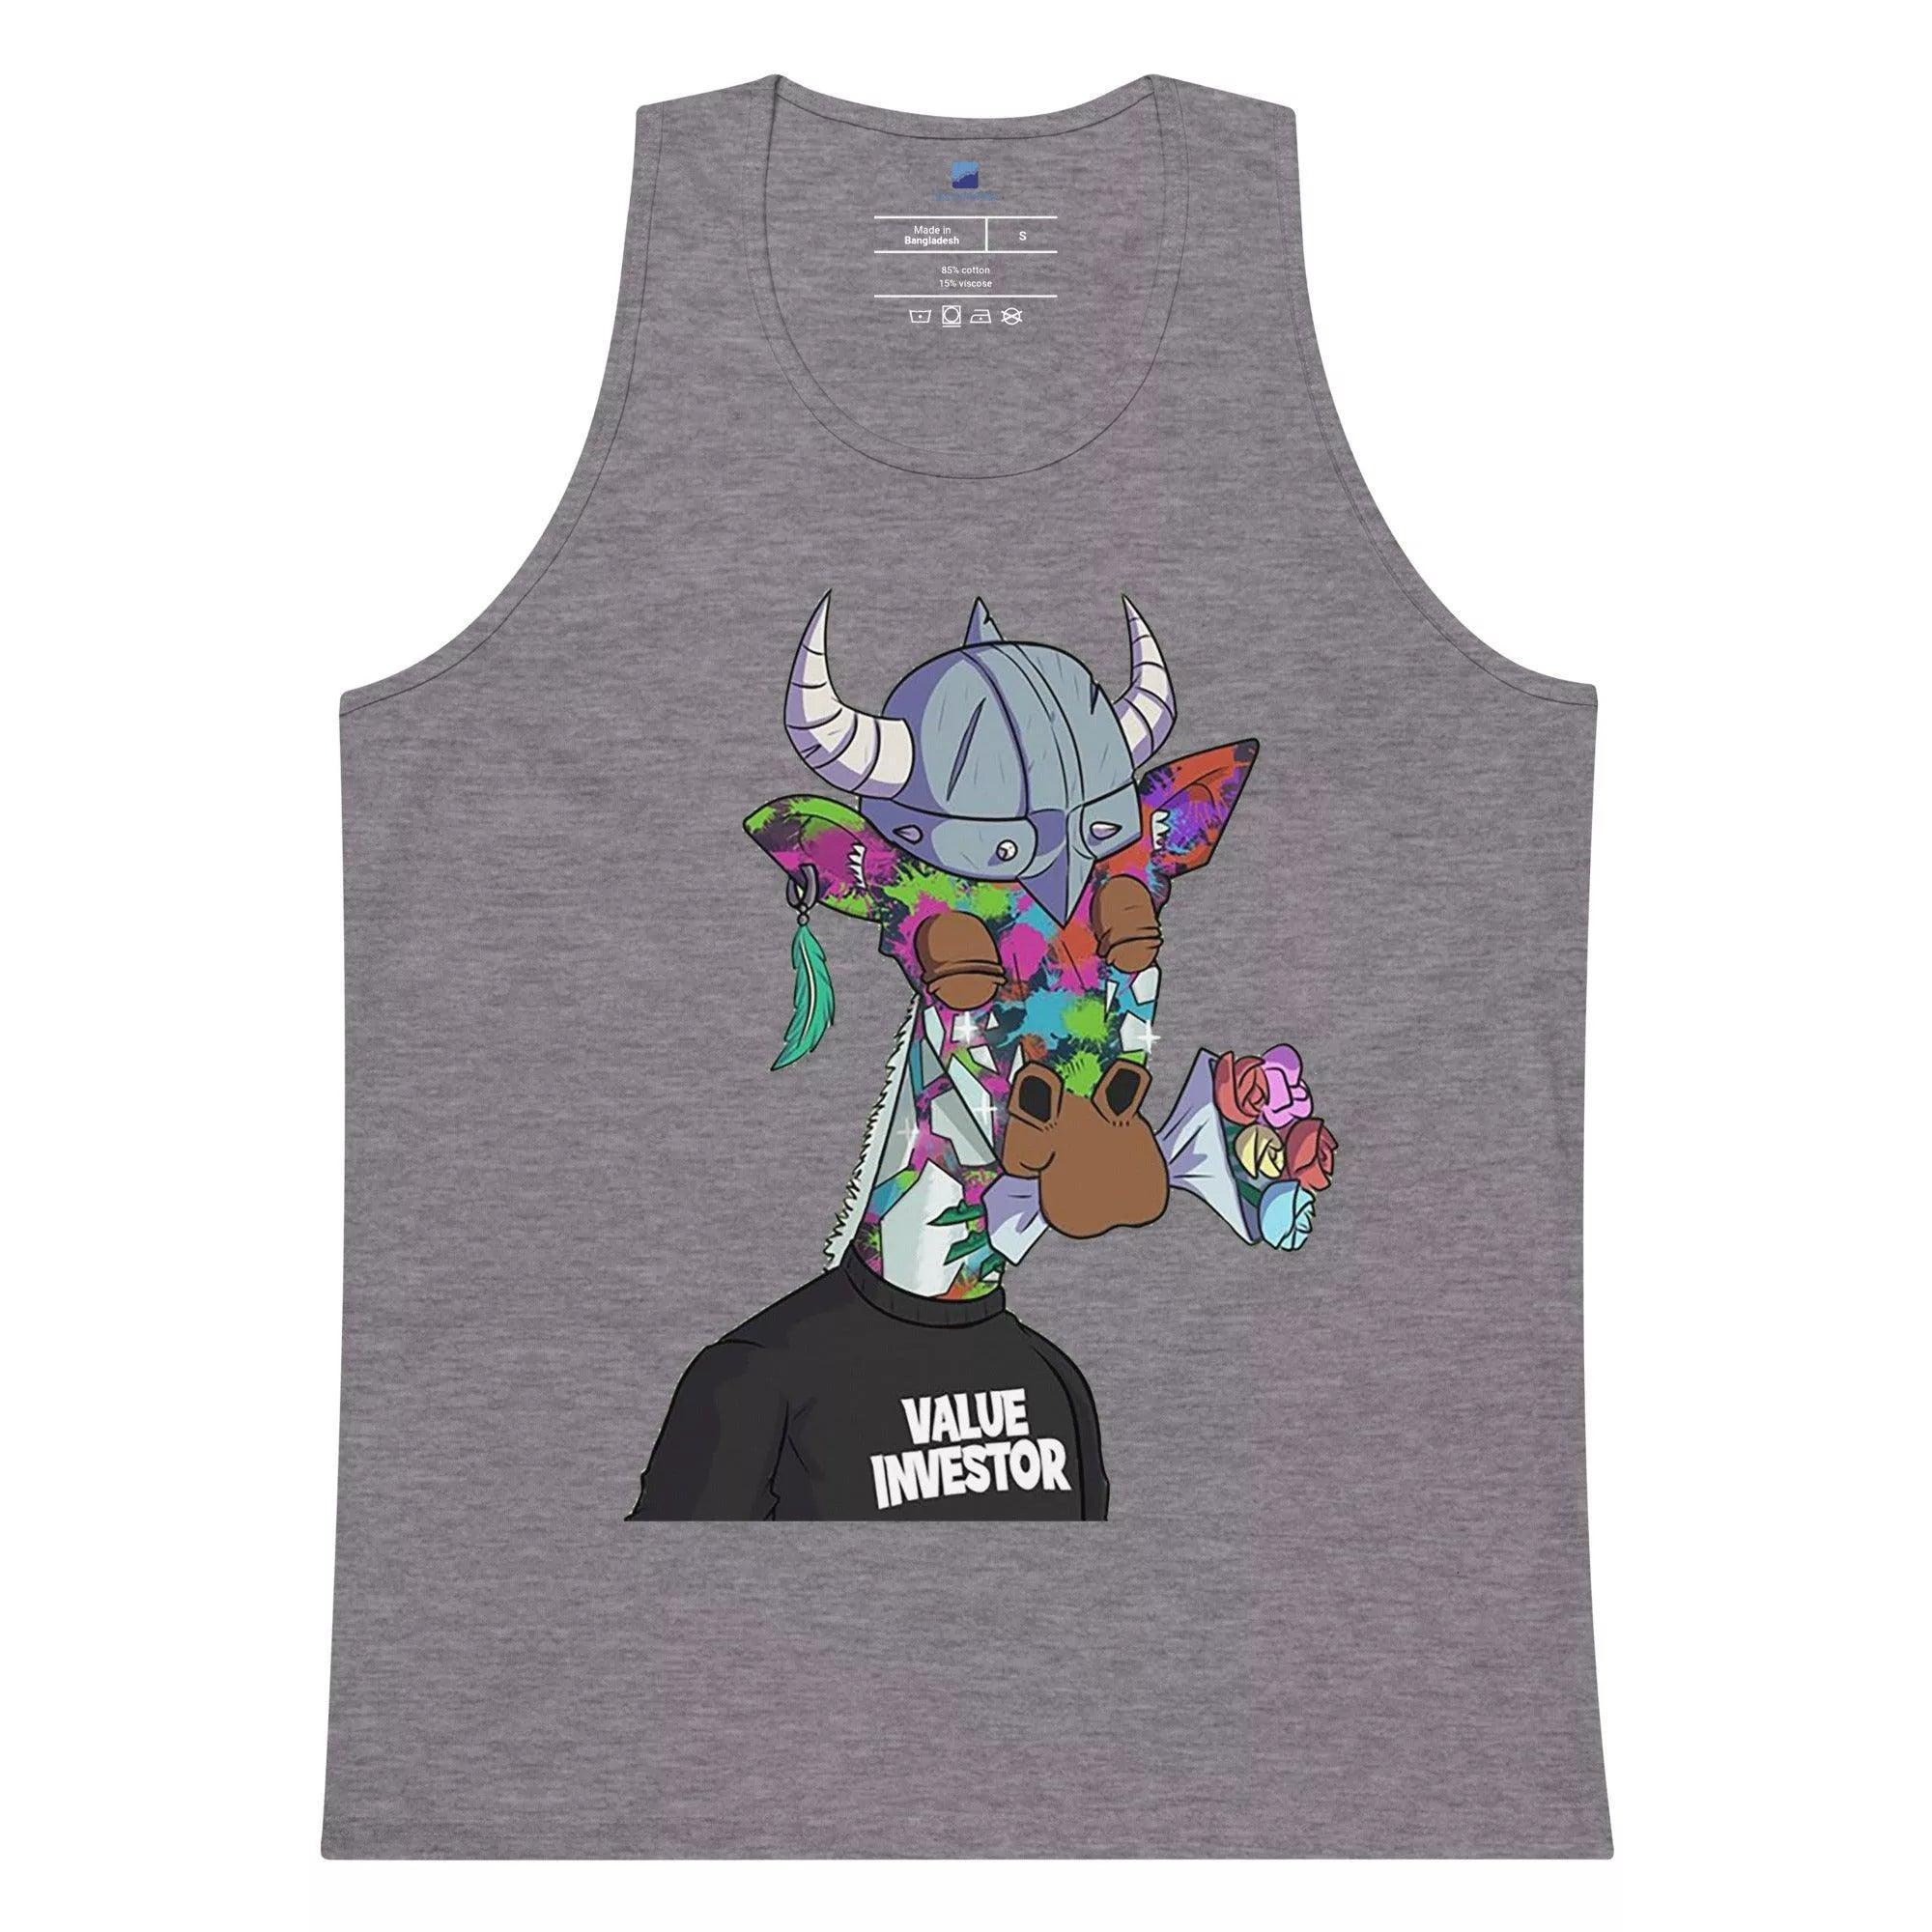 Value Investor Tank Top - InvestmenTees